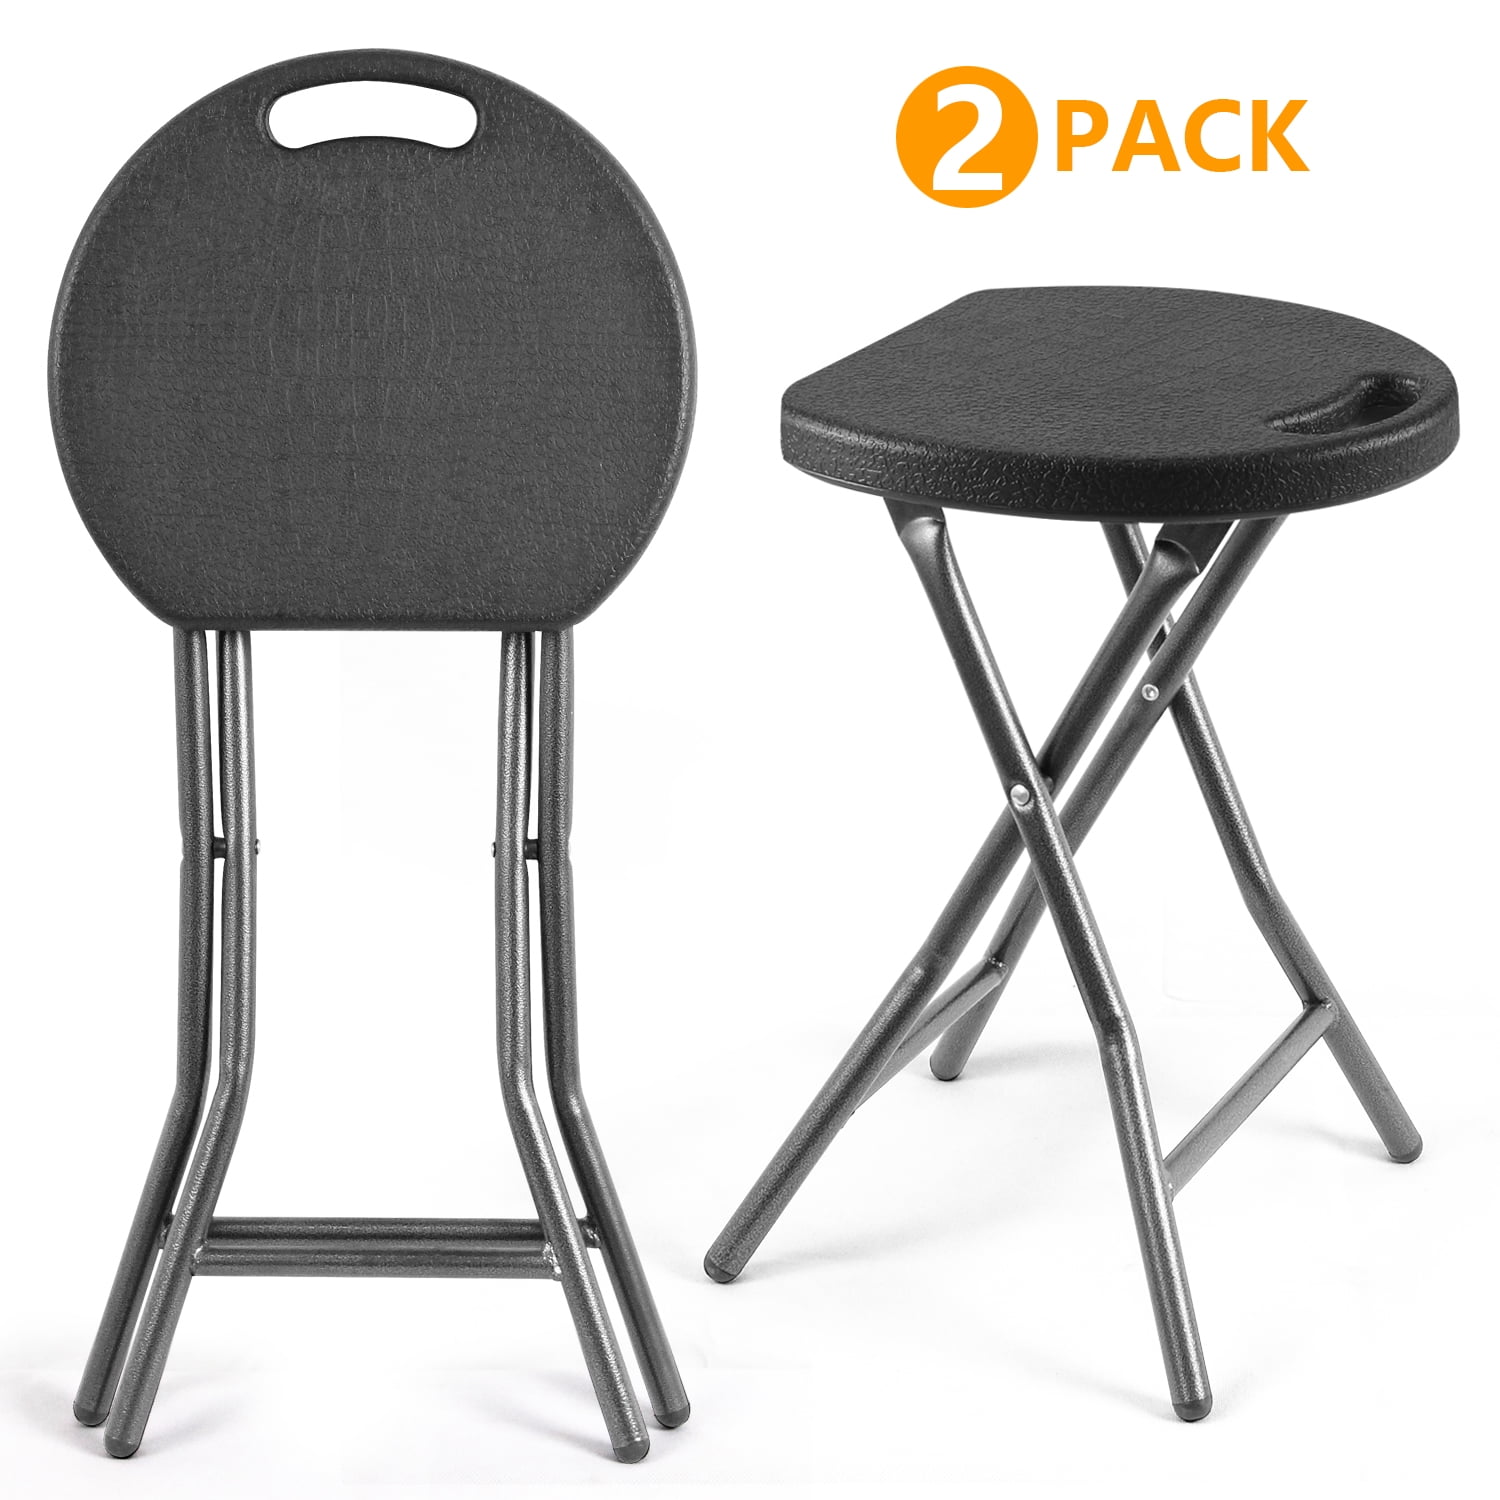 Rfiver 2 Pack Backless 18 inch Plastic Collapsible Folding Chairs